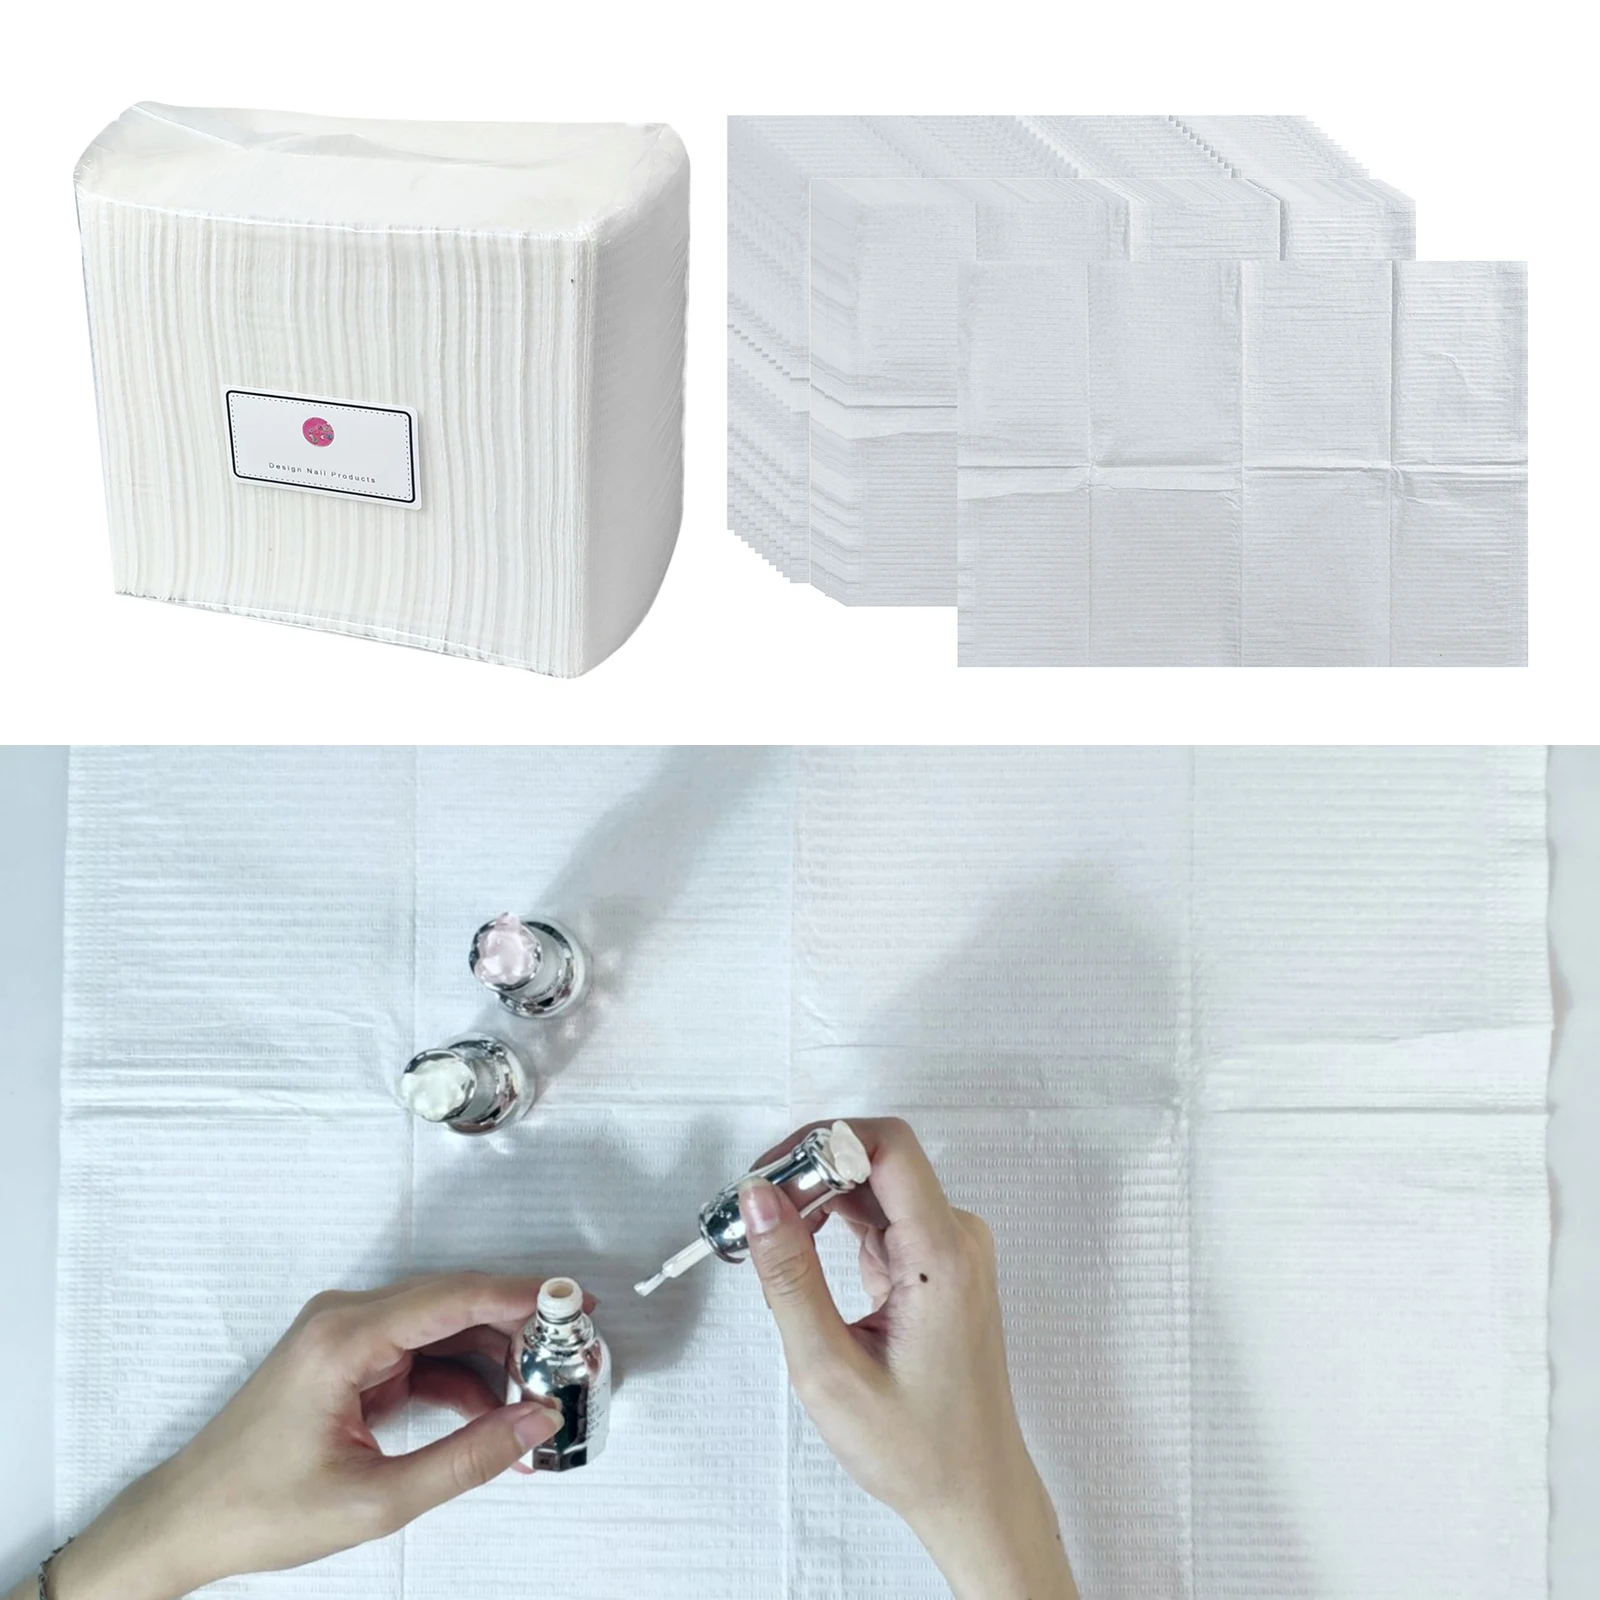 Durable Disposable Nail Art Paper Cleaning Pad Waterproof for Beauty Salon Made of Premium Materials